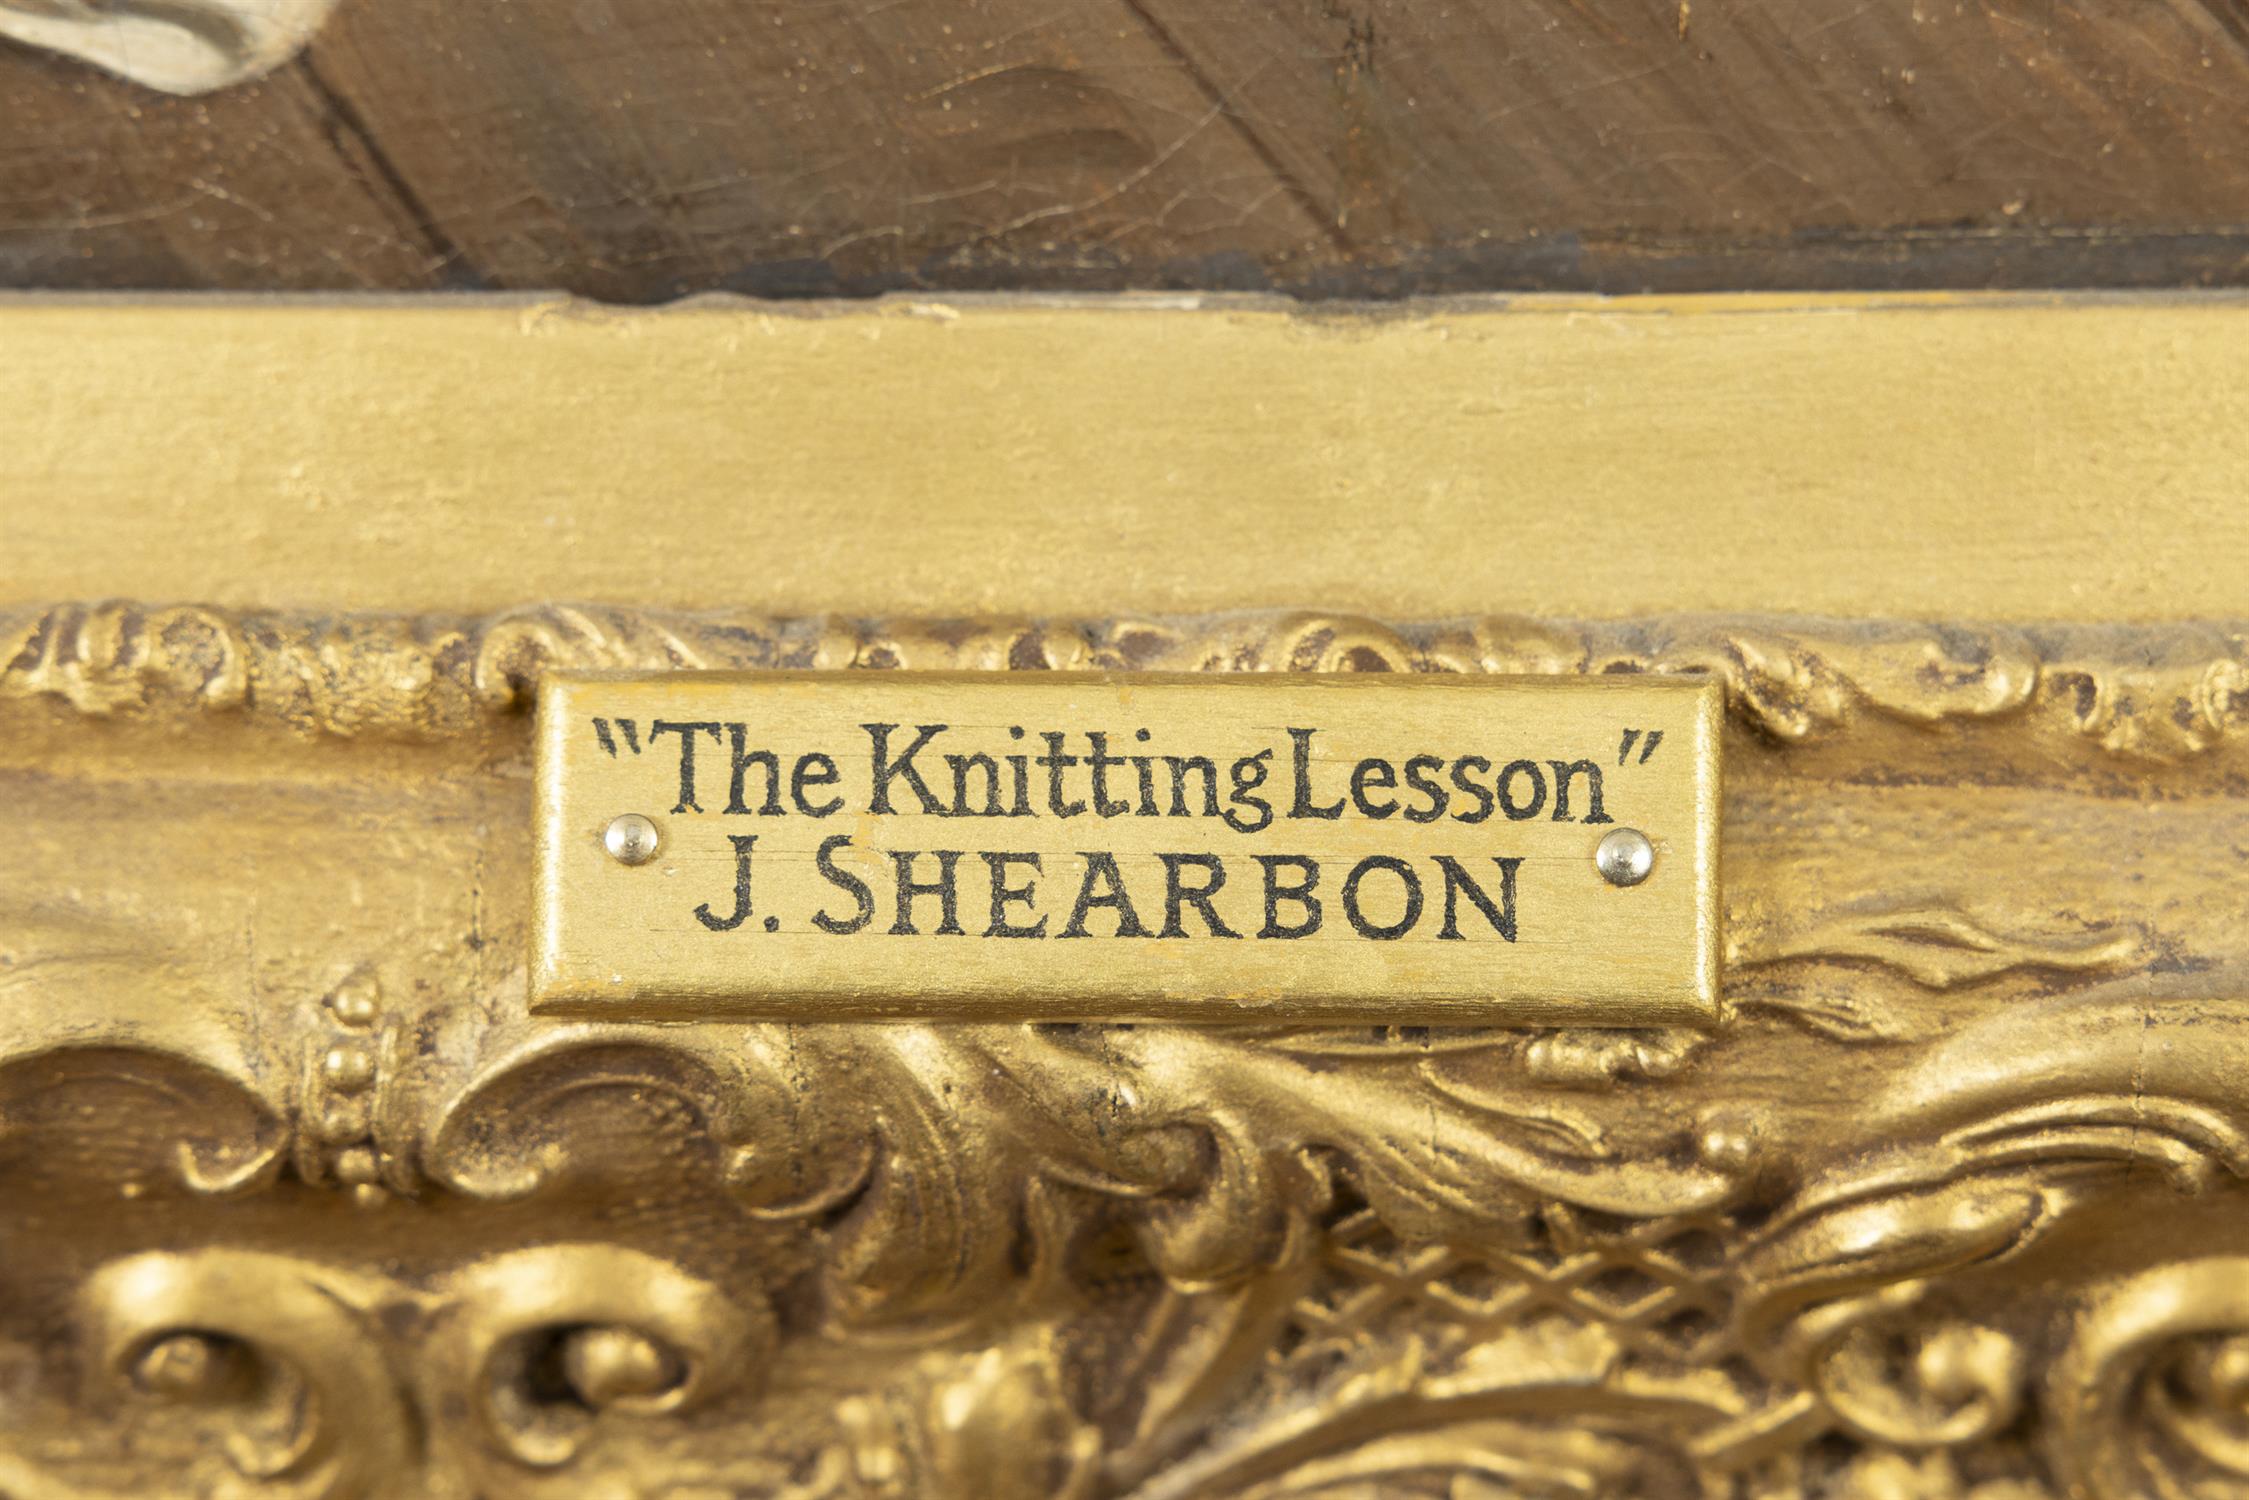 J. SHEARBON (19 CENTURY) The knitting lesson Oil on canvas 44 x 36cm - Image 3 of 4